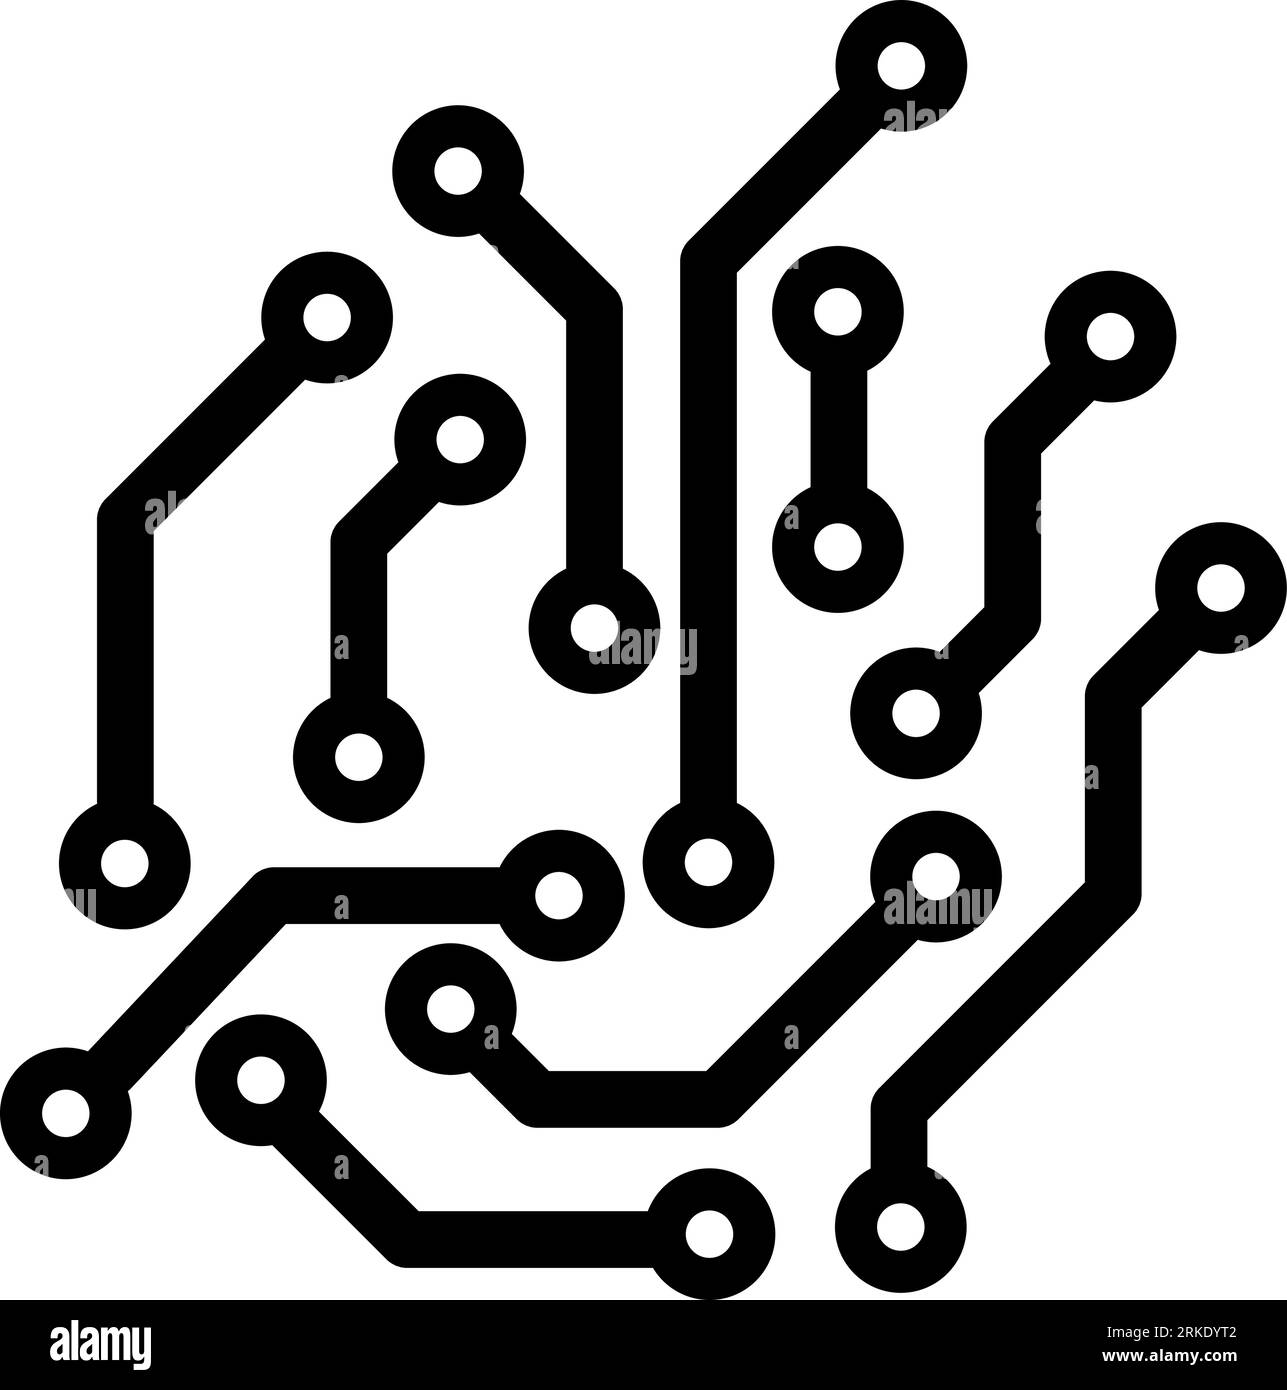 Line icon as concept of circuit or chip Stock Vector